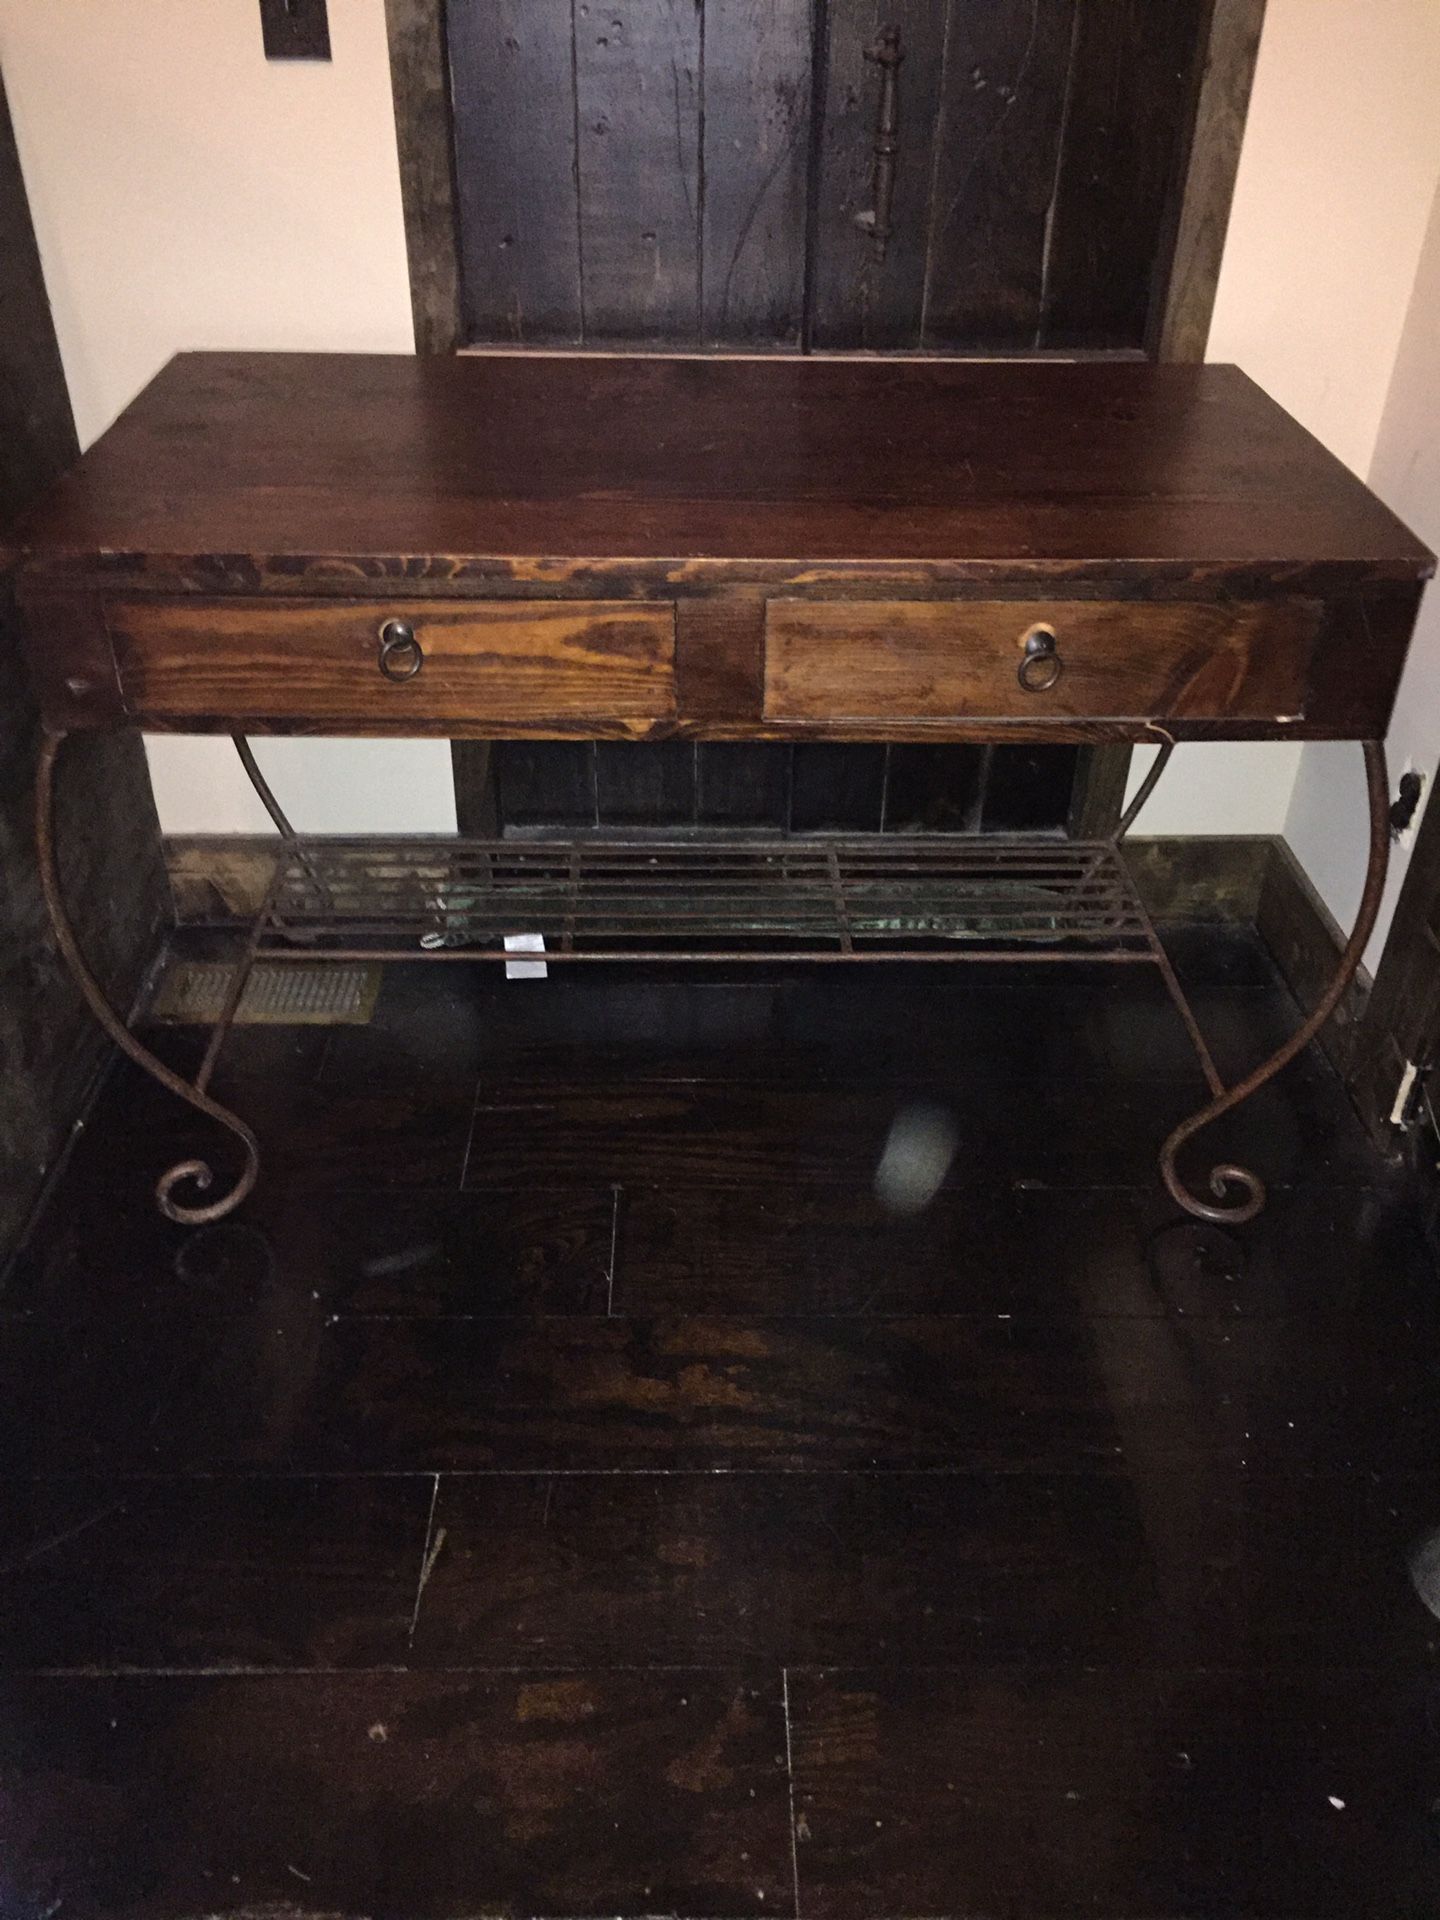 Antique wood and iron desk with matching chair